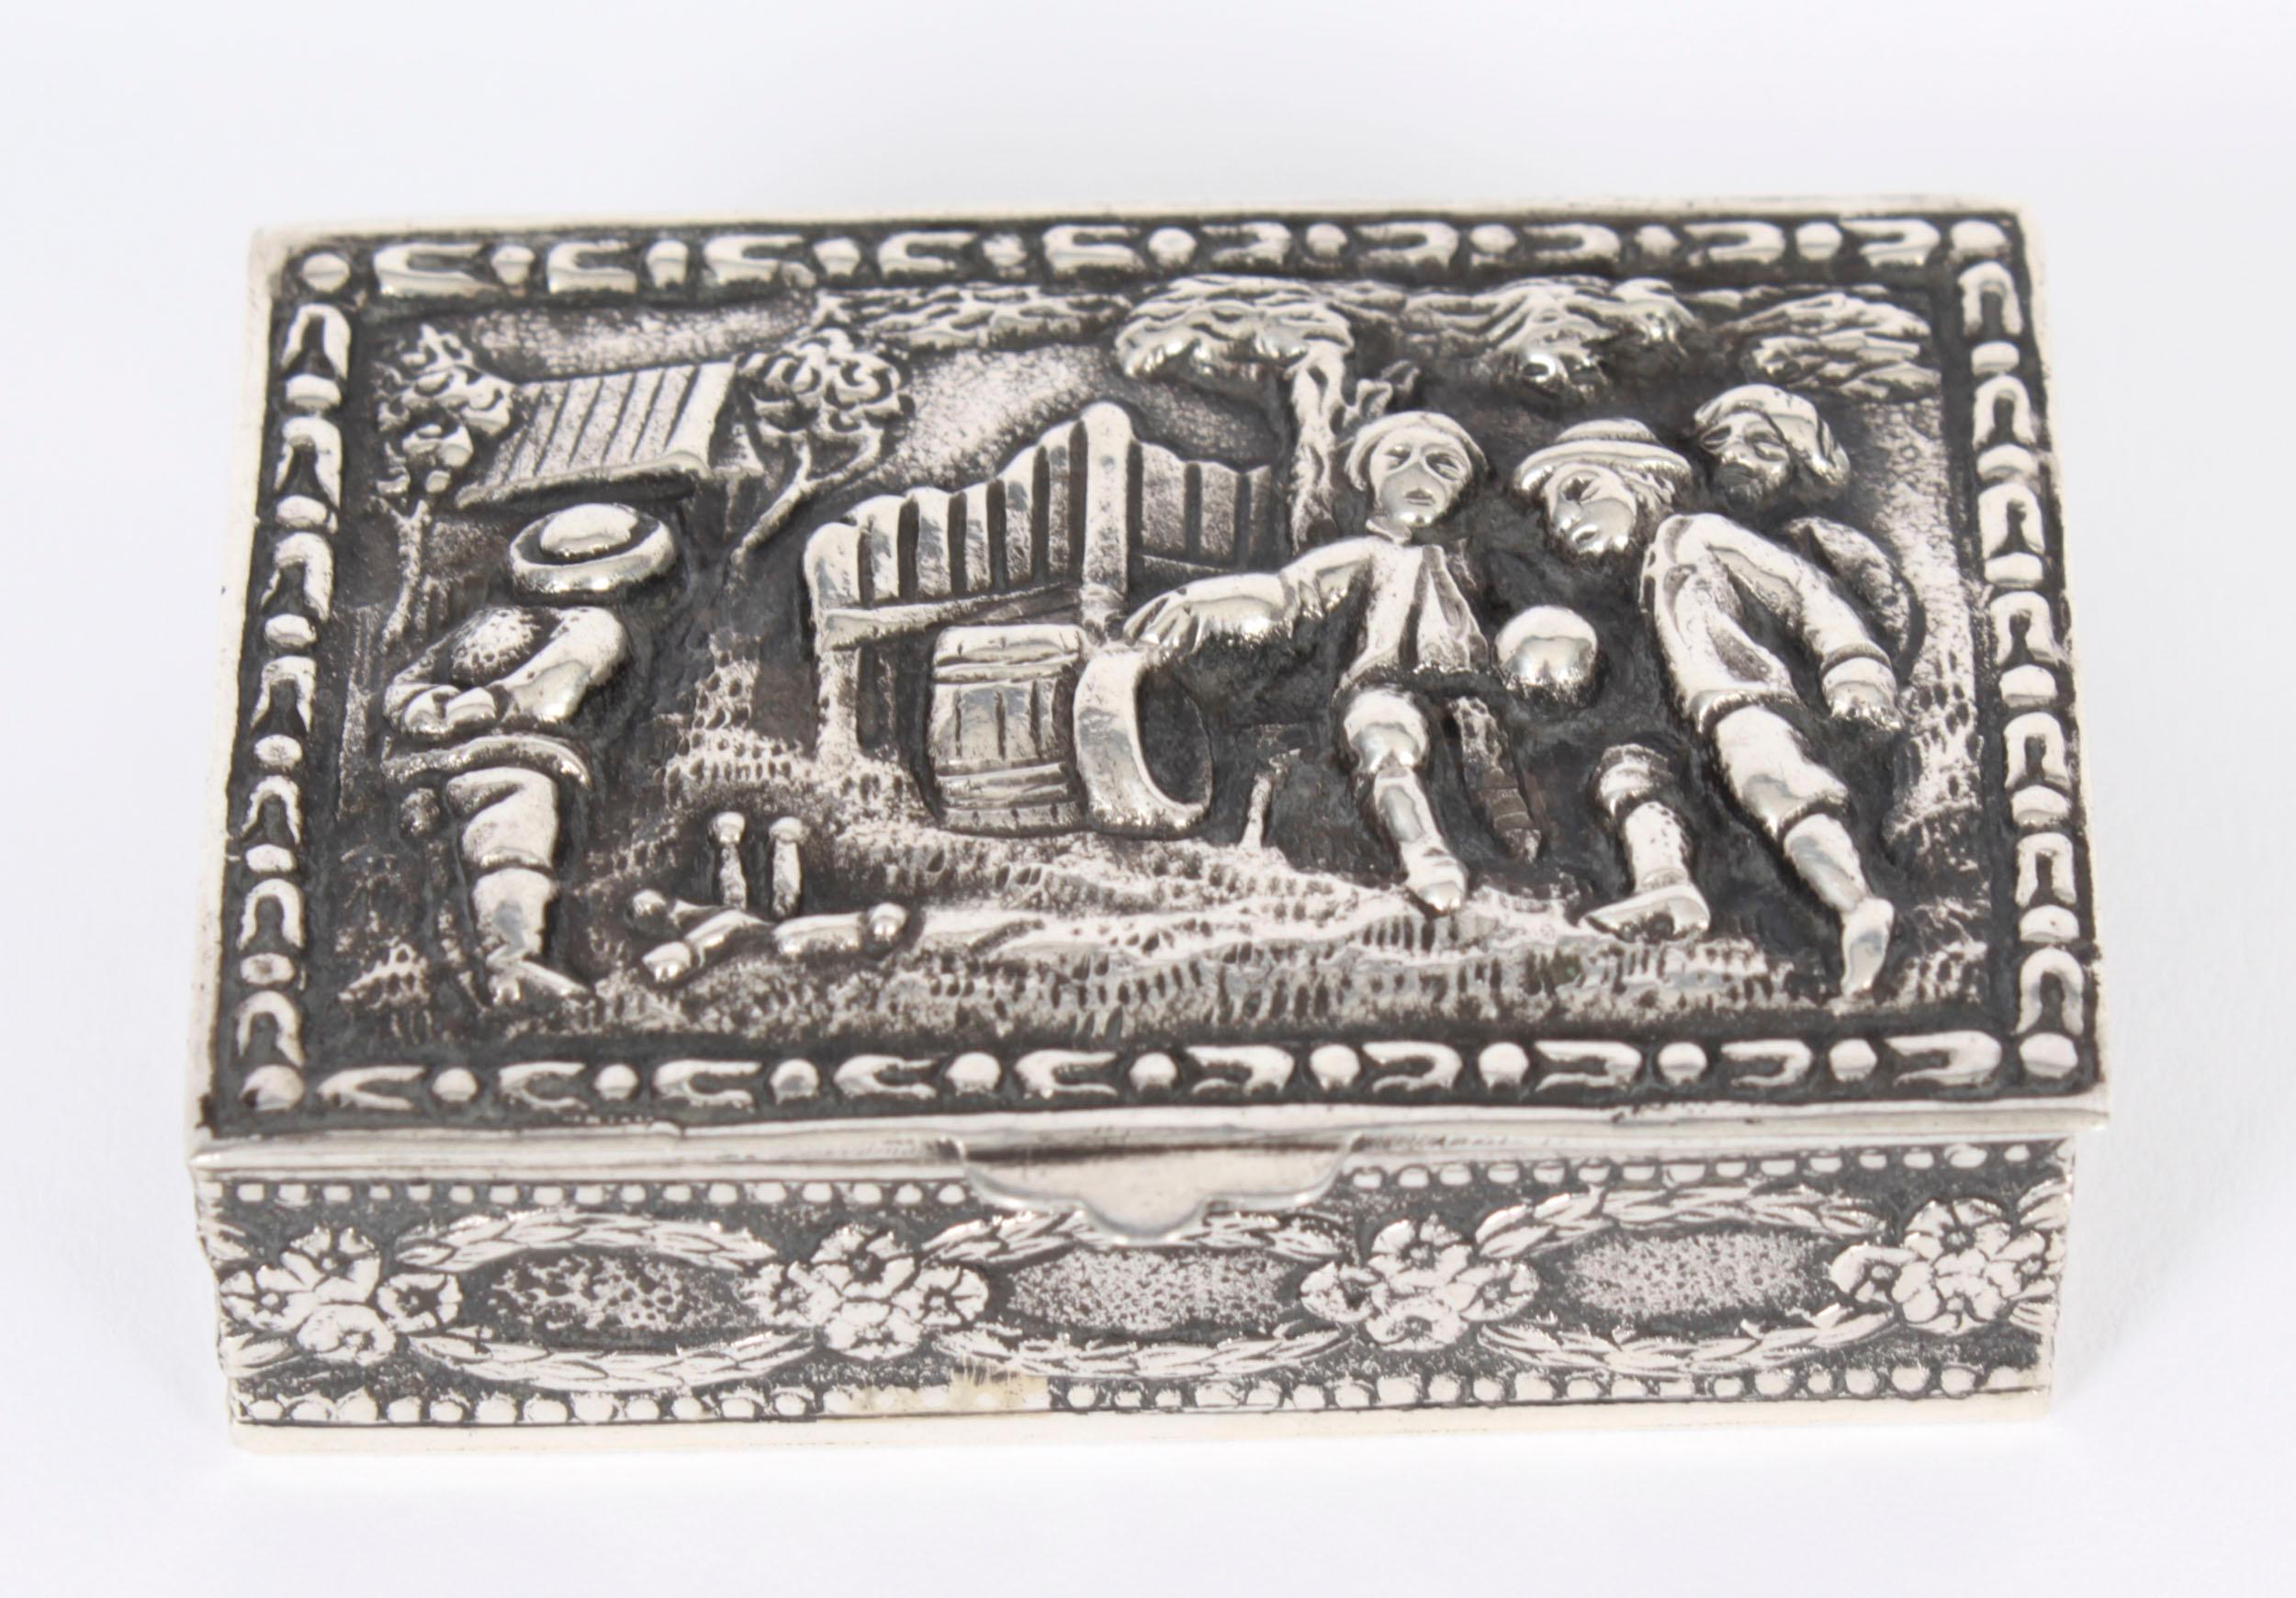 This is a wonderful heavy set antique Spanish sterling silver pill / snuff box,  bearing the Spanish 5 pointed star for sterling silver with makers mark ERA, Circa 1900 in date.

It is decorated with repousse figural countryside scenes.
